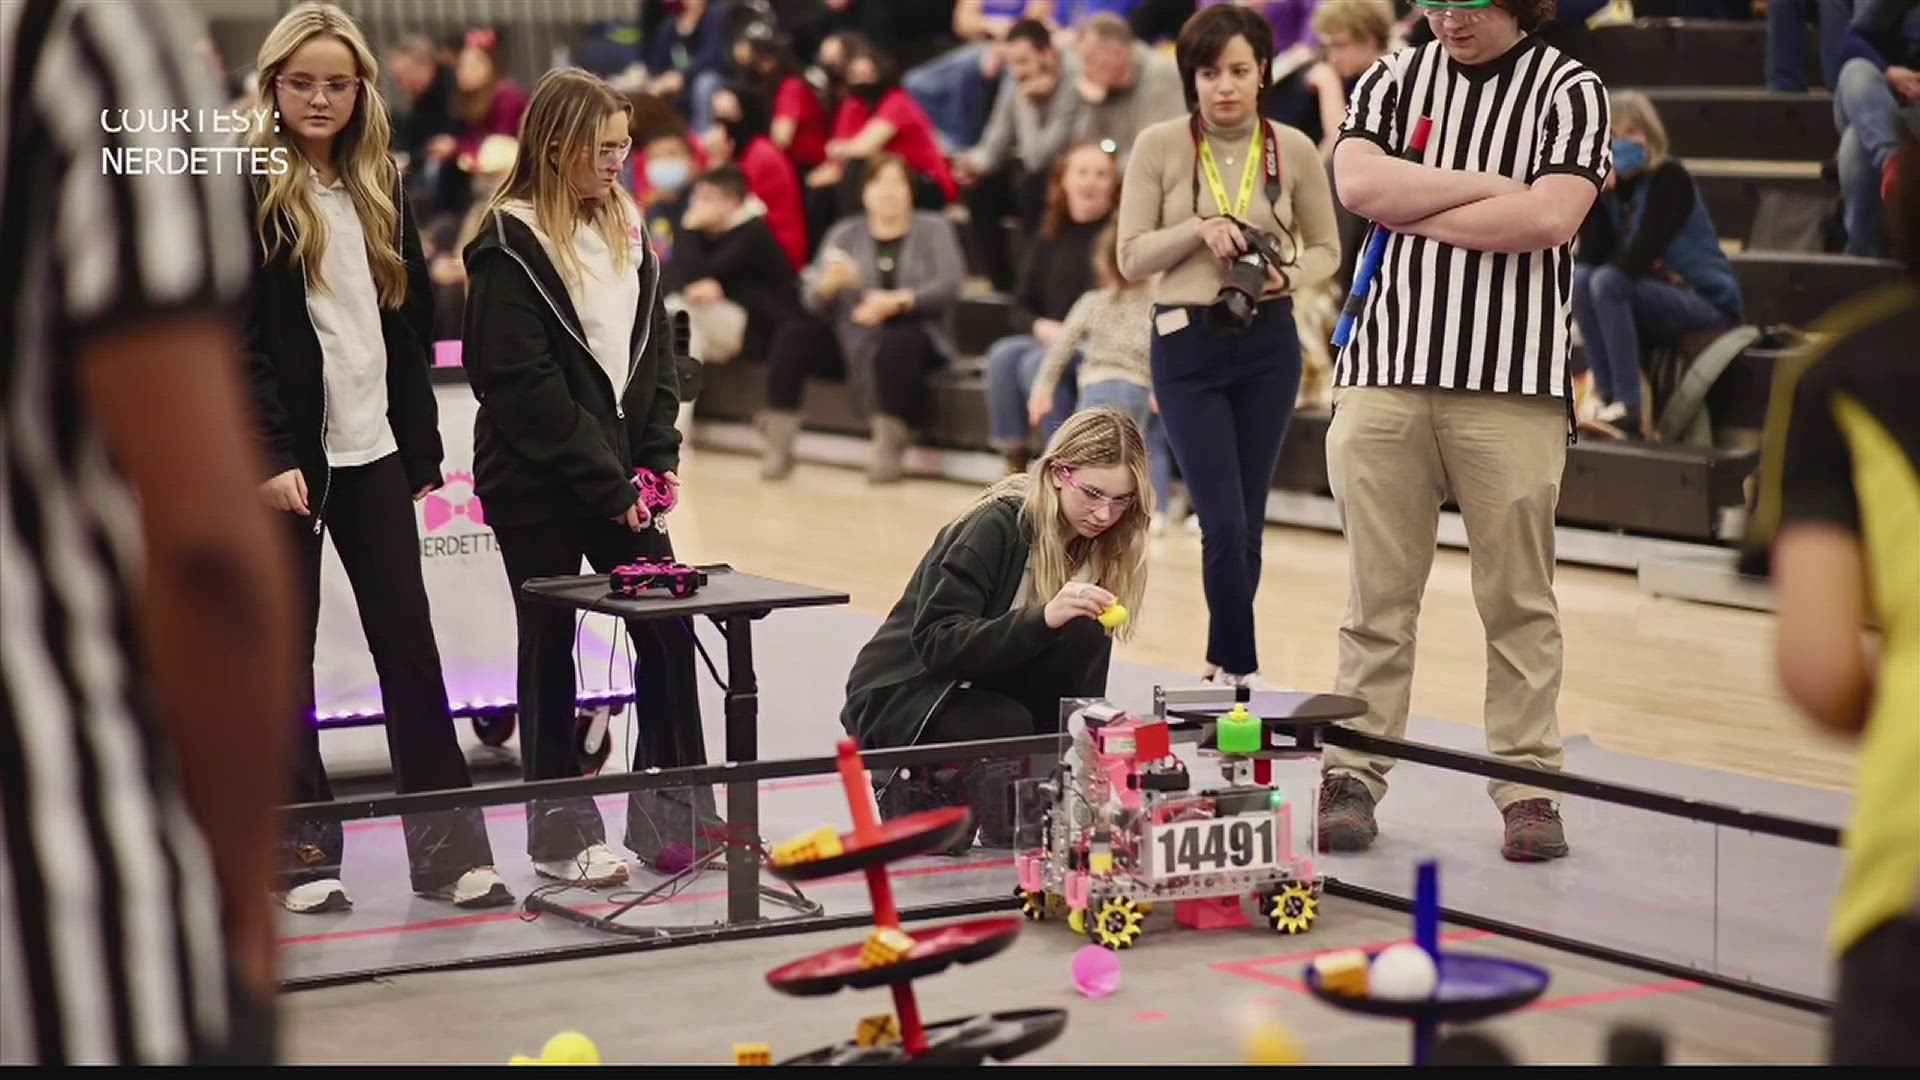 The Huntsville-based, all-girls robotics team hopes to win awards and recruit new members with their approach.